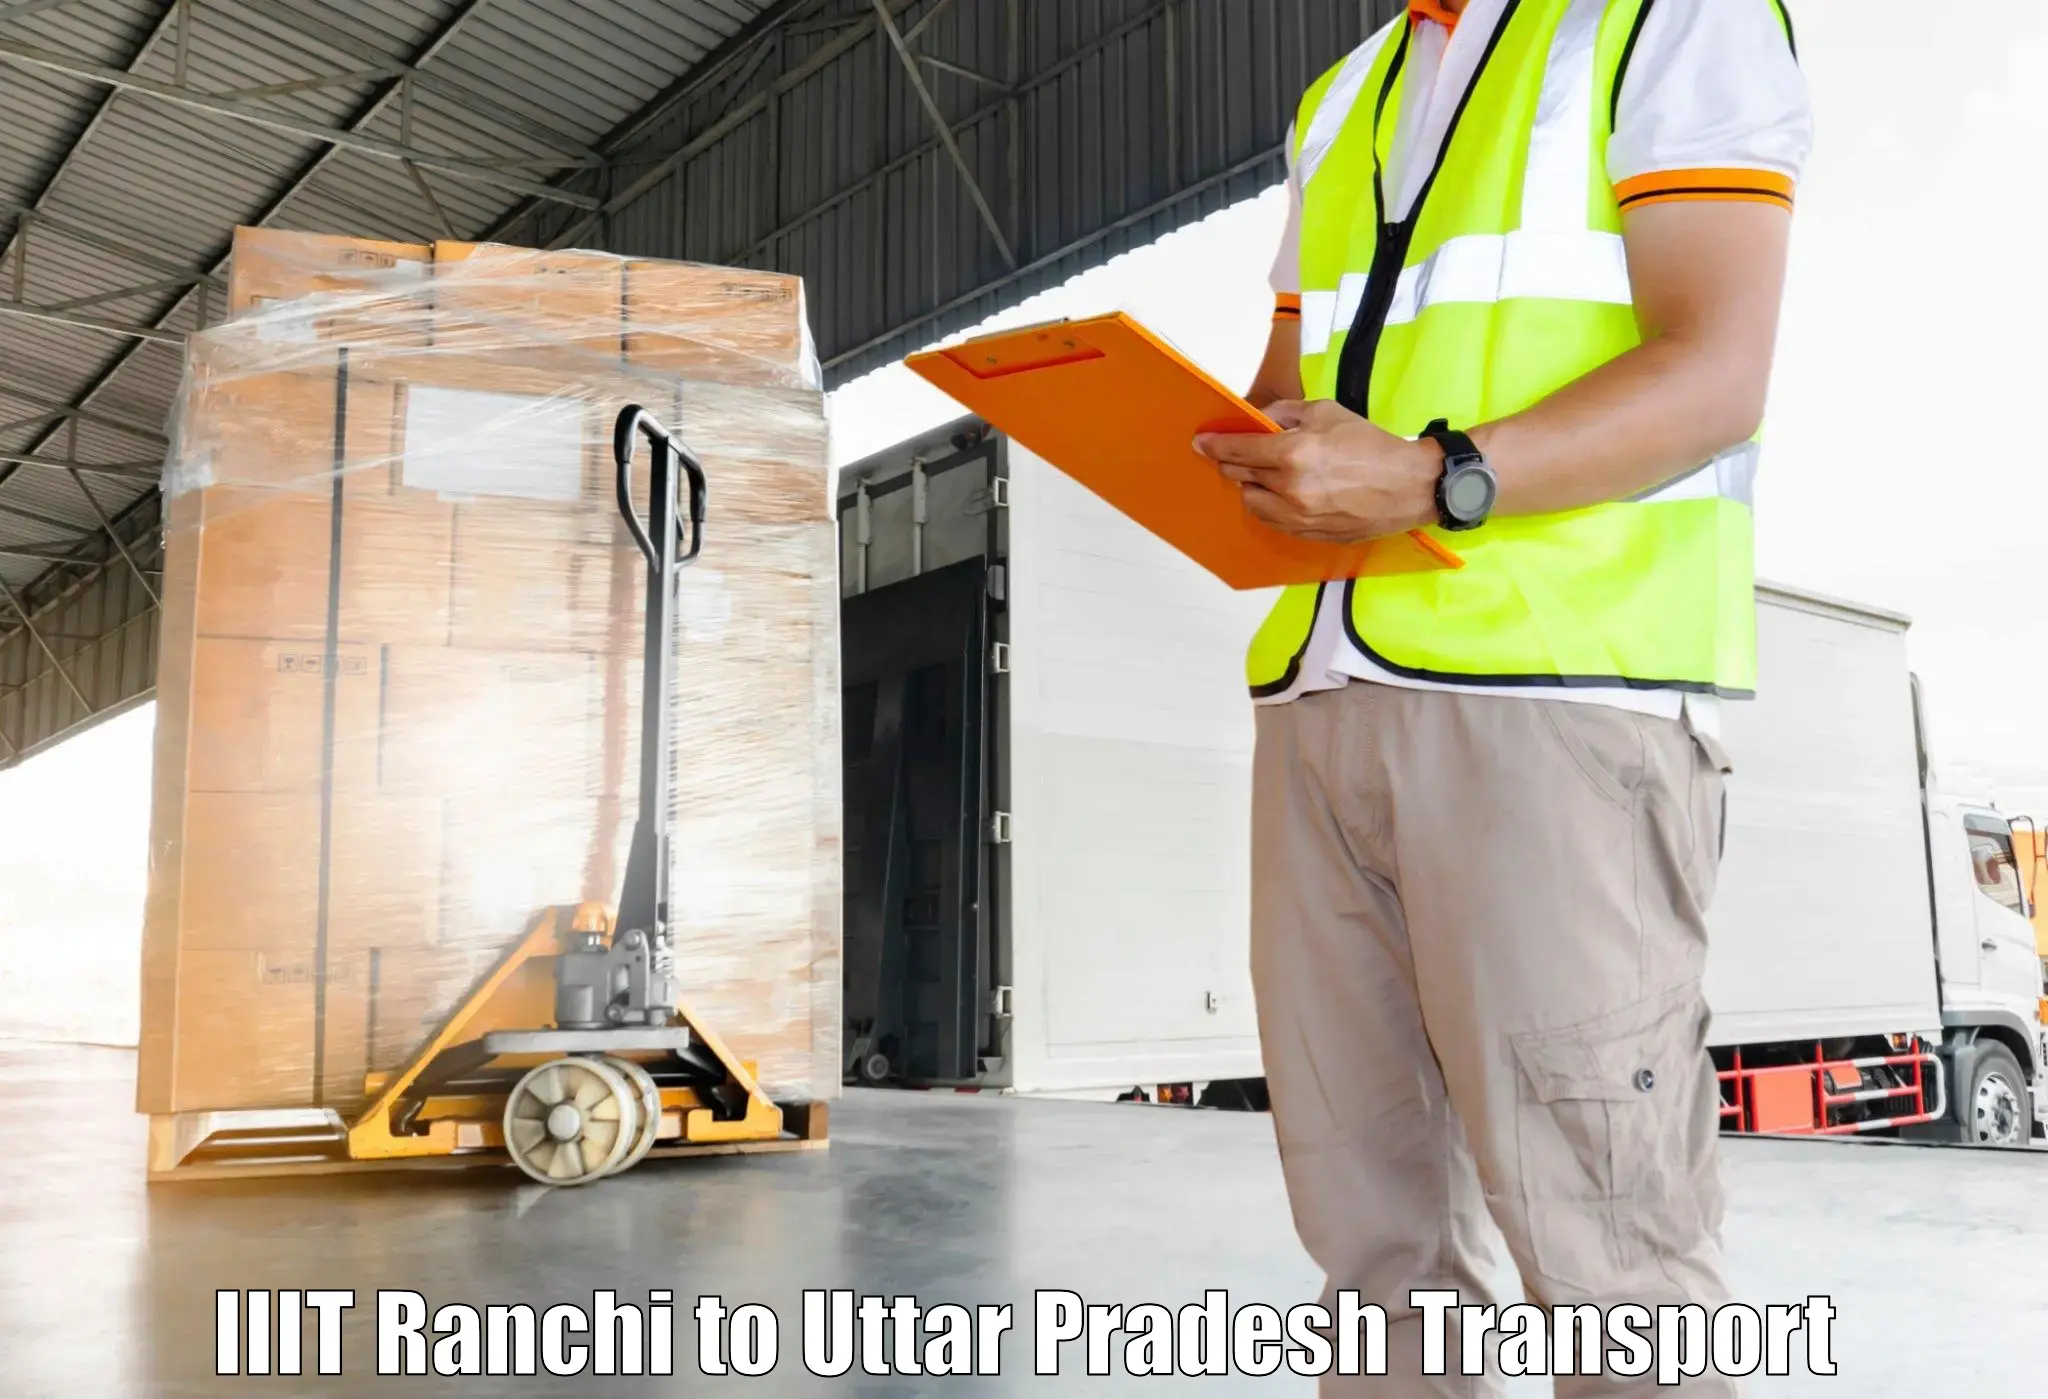 Daily parcel service transport IIIT Ranchi to Baraut